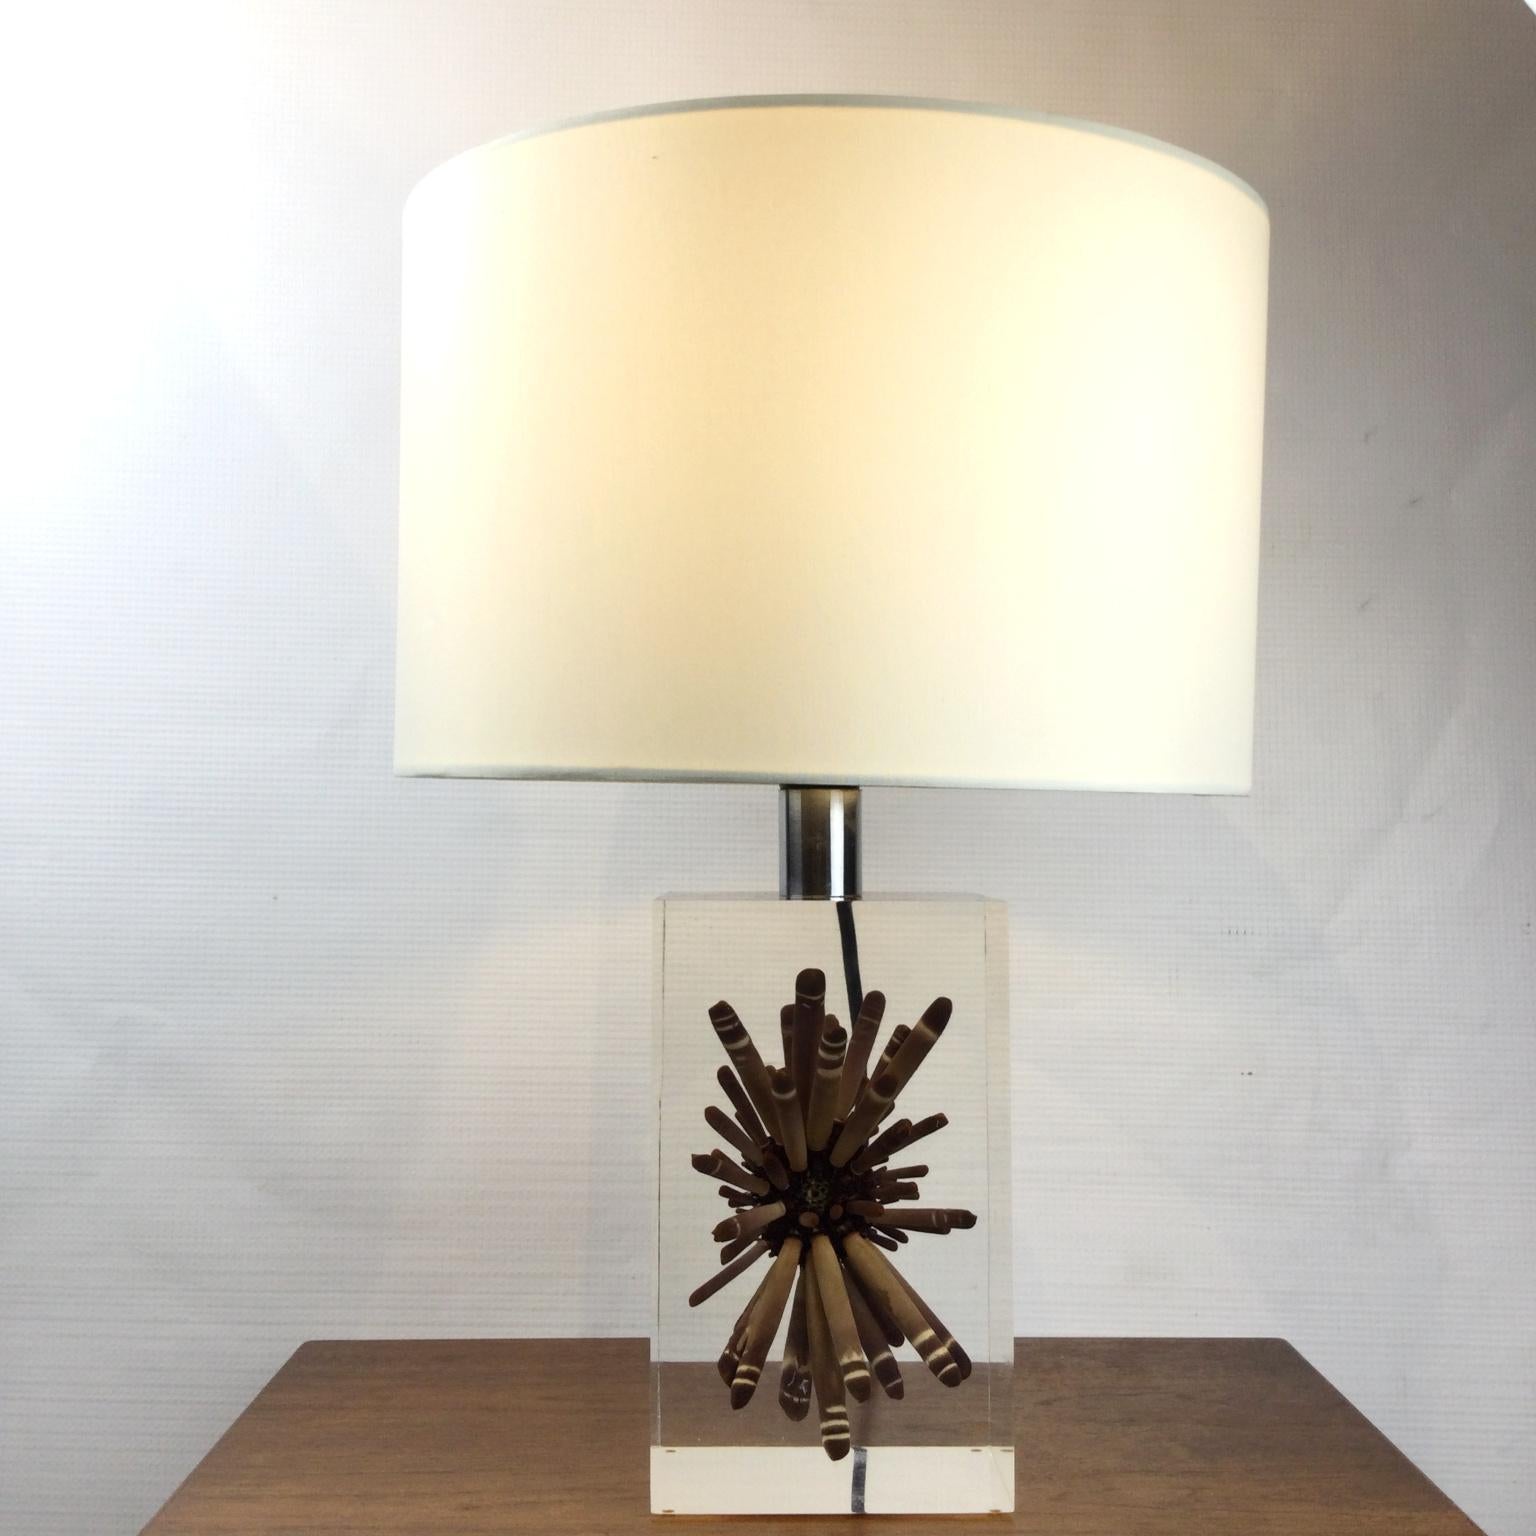 Rare Lucite bedside table lamps with inclusion of a tropical sea urchin...
Design by the French plastic artist and biologist Pierre Giraudon (1923-2012)
During the 1960s, 1970s, and 1980s, he made sculptures, lamp bases, and objects out of colored